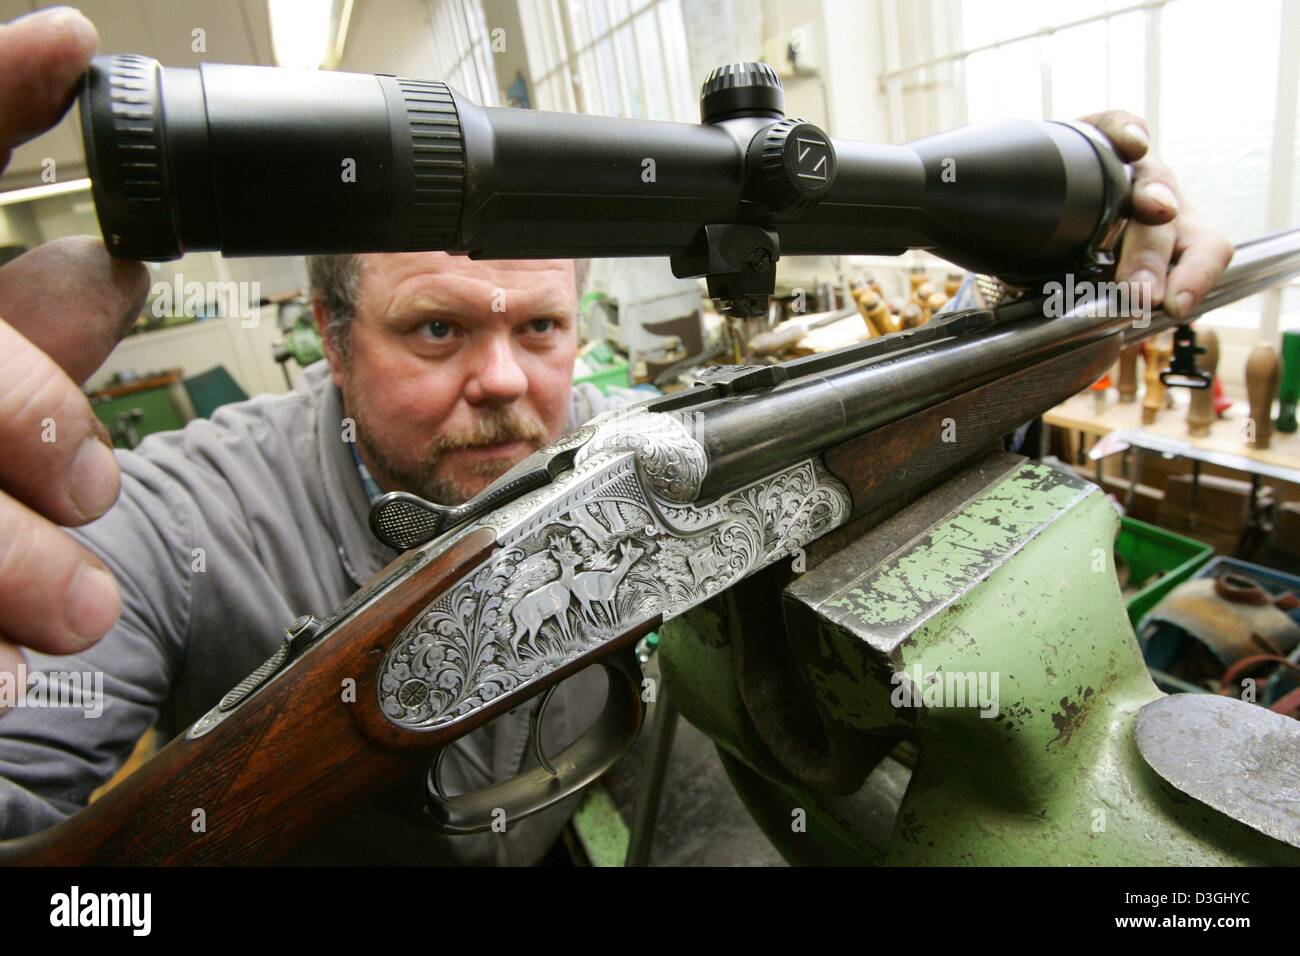 (dpa) - Erich Gerike, employee of gunsmith Knappworst, inspects a telescopic sight on a rifle at the gunsmith's workshop in Braunschweig, Germany, 15 June 2004. There are around 30 traditional gunsmiths left in the state of Lower Saxony. The new gun law requires huntsmen and sports riflemen to keep their rifles locked up in special armour cabinets. Stock Photo